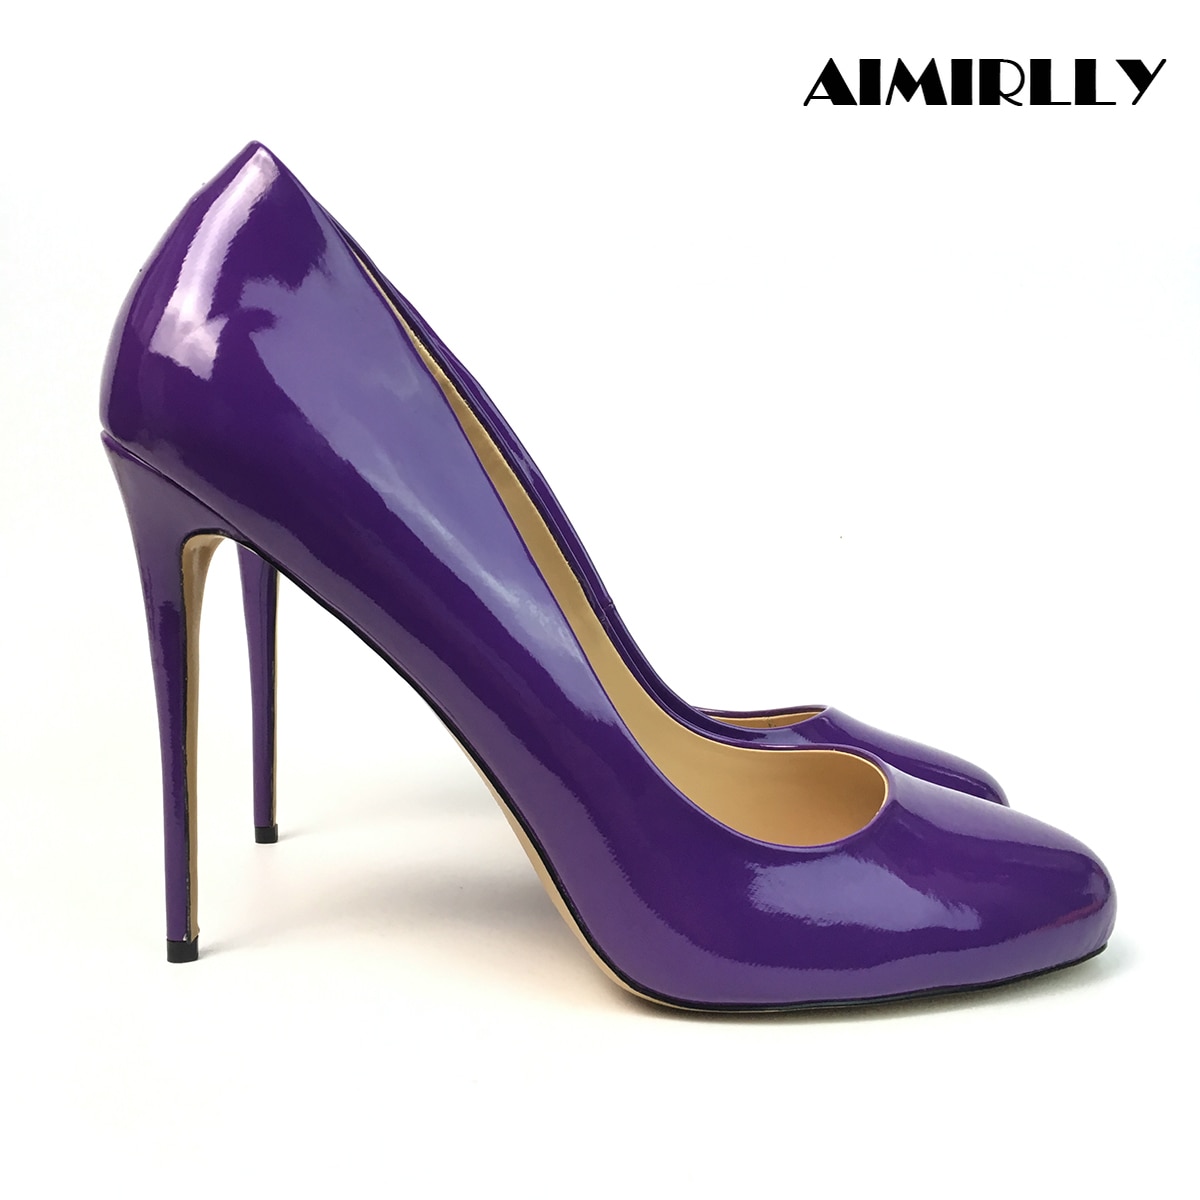 Women‘s Shoes Round Toe High Heels Pumps Ladies Formal Evening Party Wedding Dress Shoes Purple Sexy Heels Slip On Aimirrly